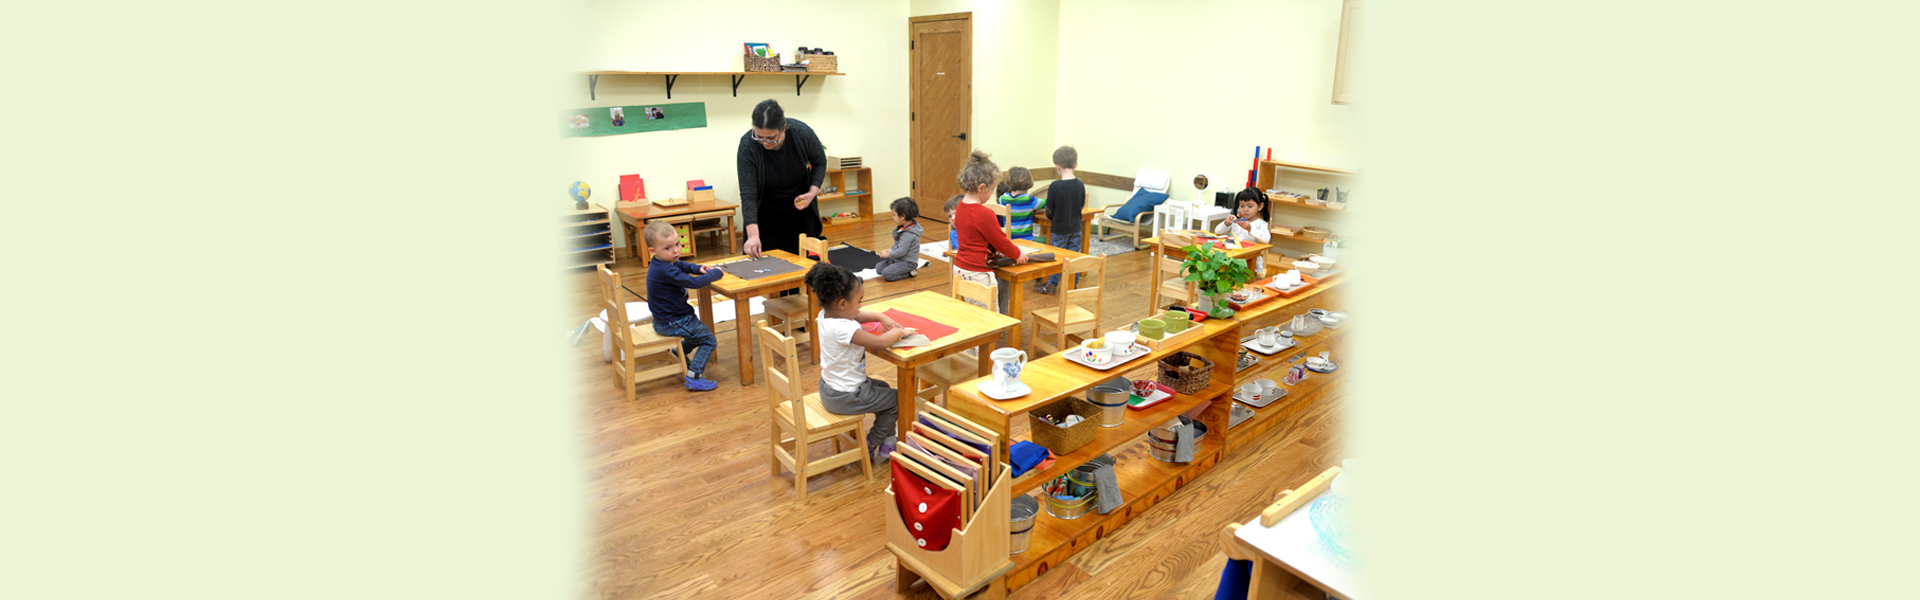 How does the Montessori approach promote creativity and imagination in children?